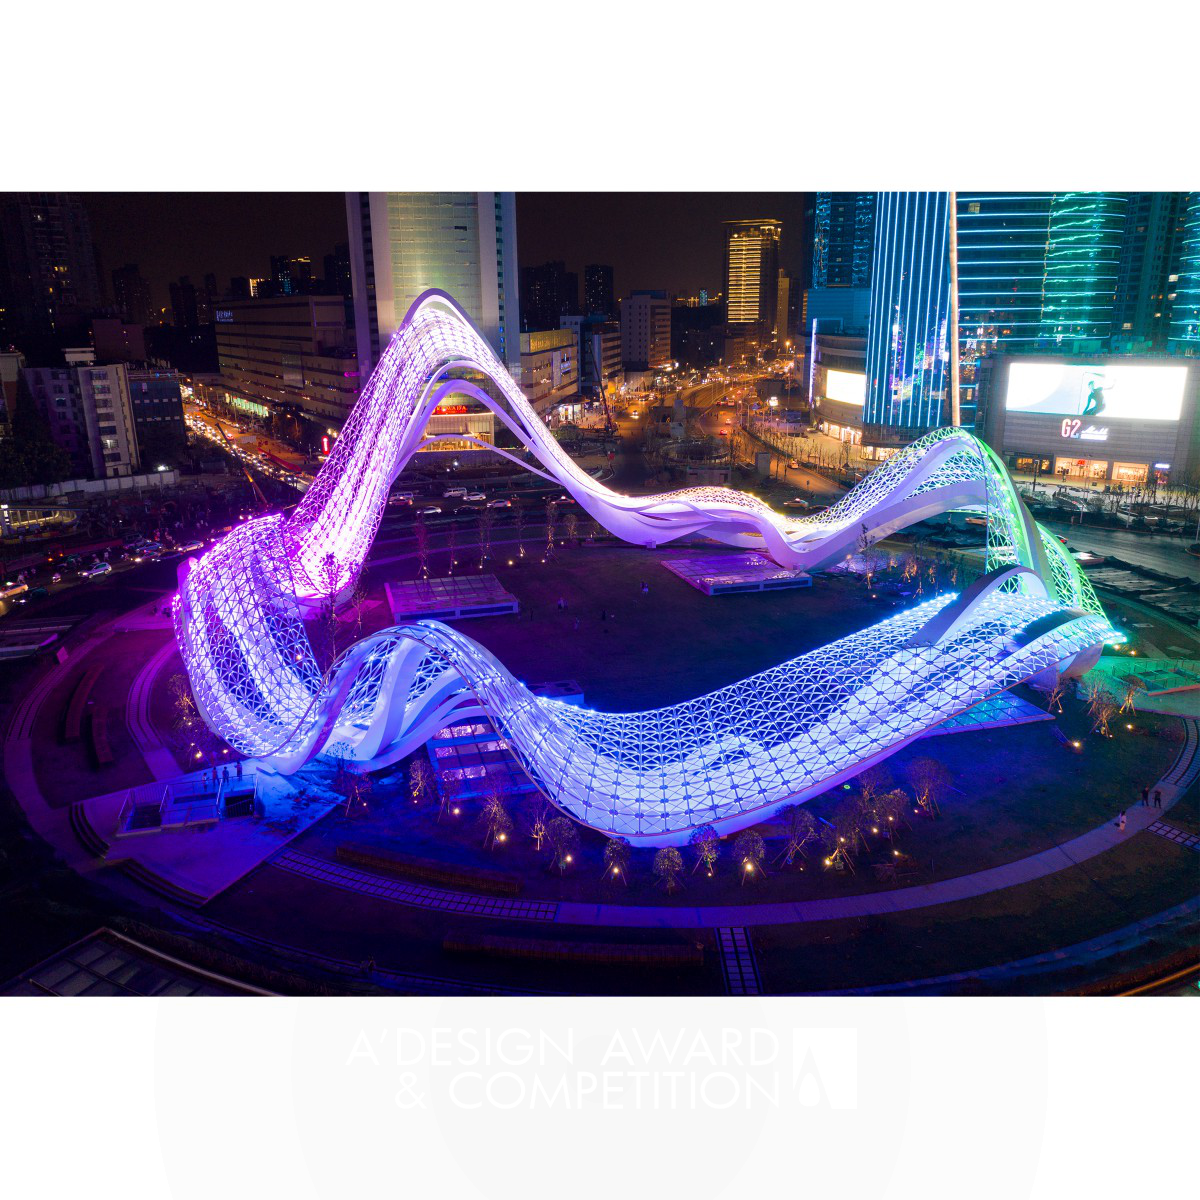 Milky Way Giant Installation Artwork with Lights